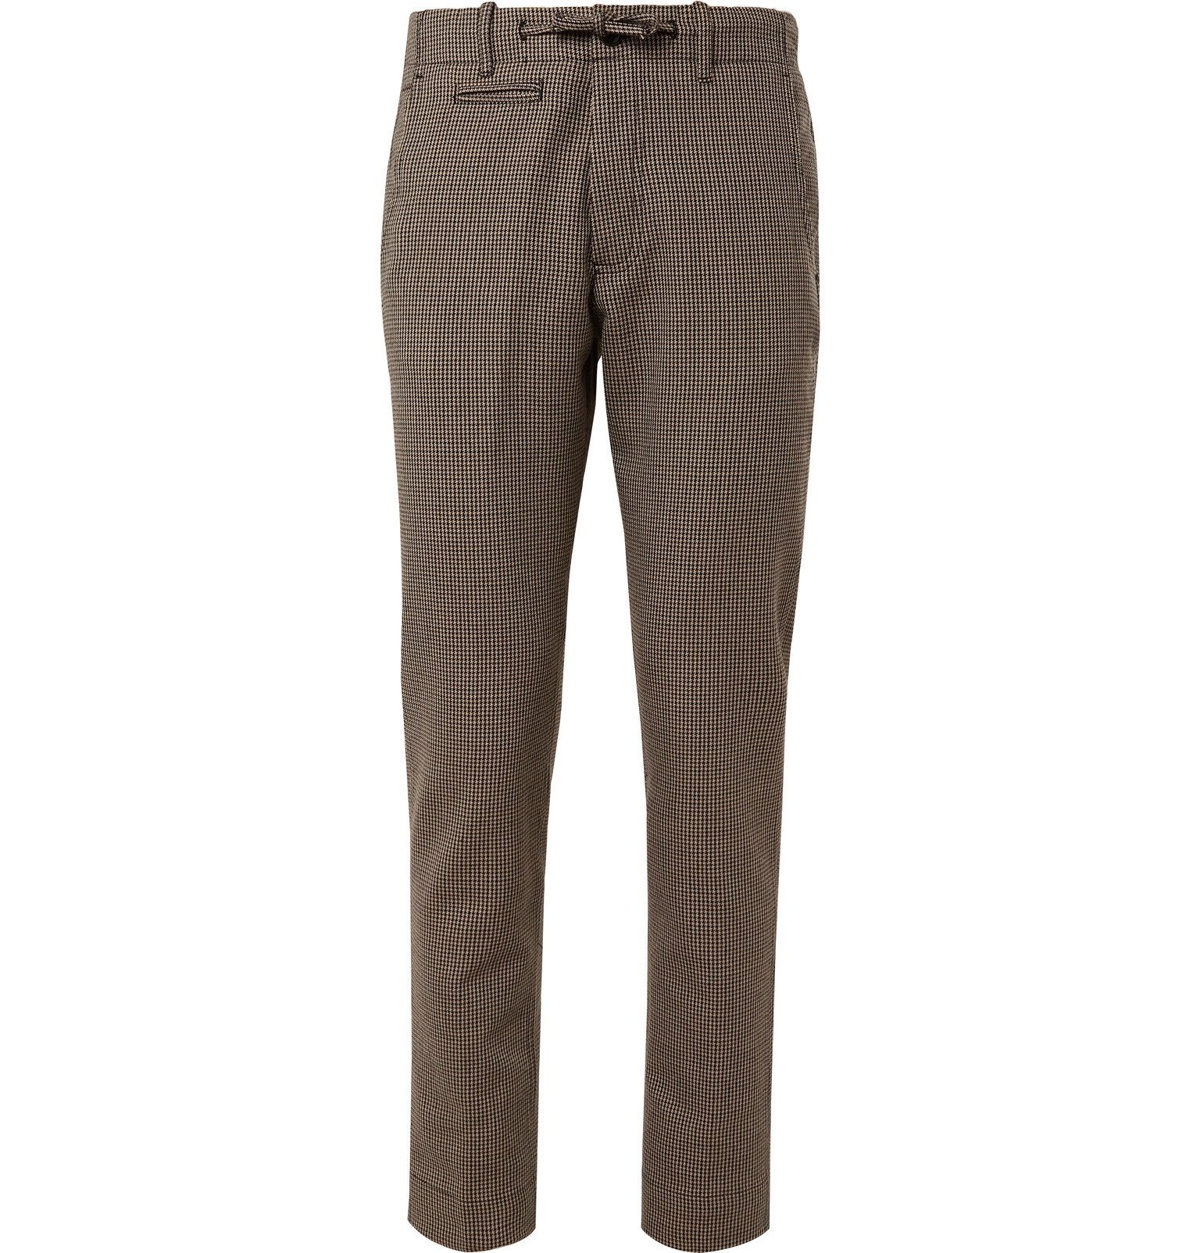 MAN 1924 - Brown Tomi Slim-Fit Tapered Puppytooth Wool and Cotton-Blend ...